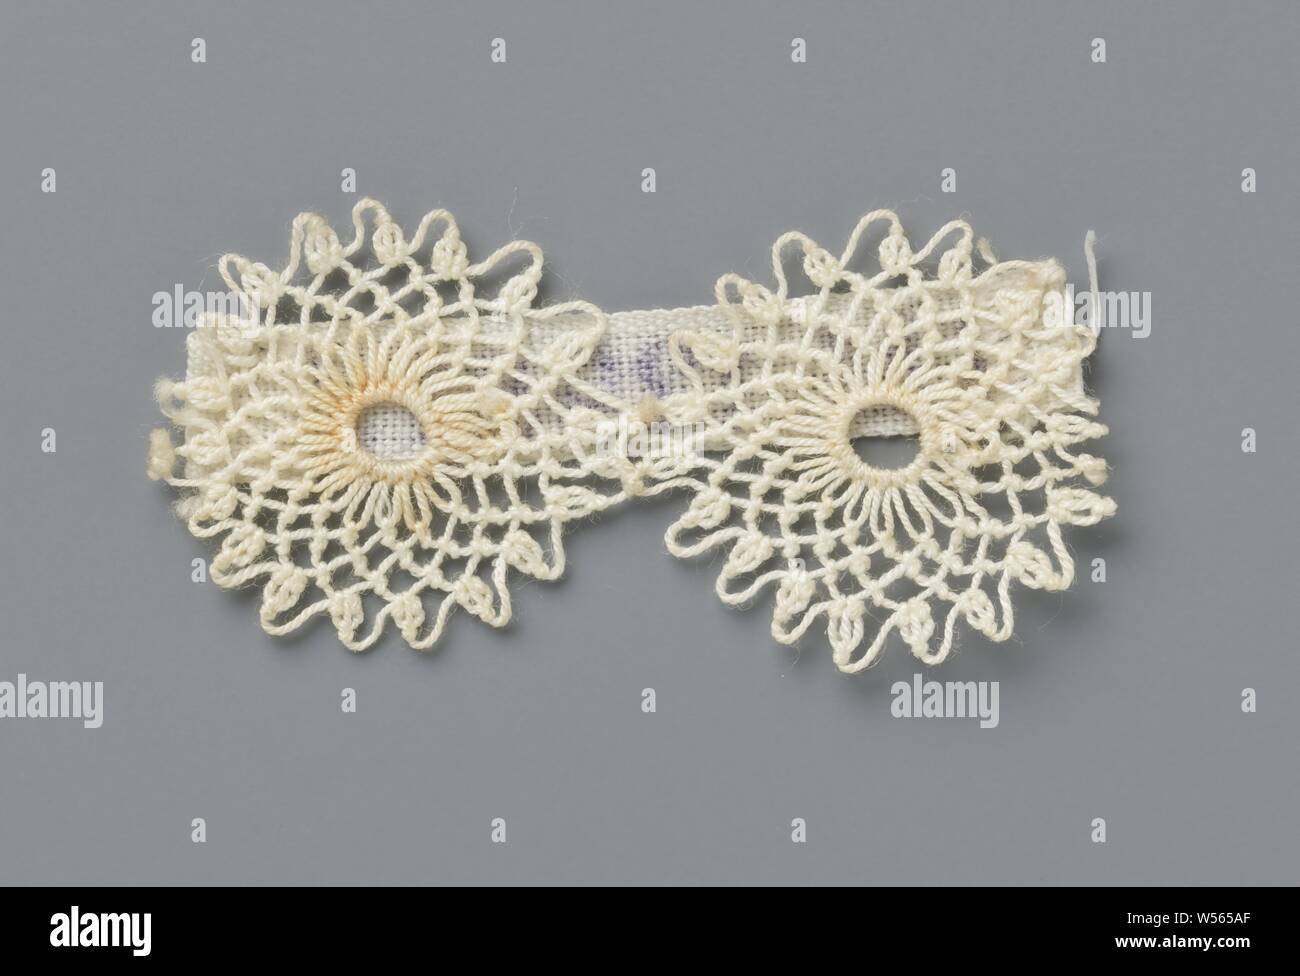 Fragment of a knotted lace with two circles, Fragment of a natural-colored knotted lace: Chebka lace. Two connected circles., anonymous, Palestina, c. 1900 - in or before 1922, linen (material), l 4 cm × w 2 cm Stock Photo